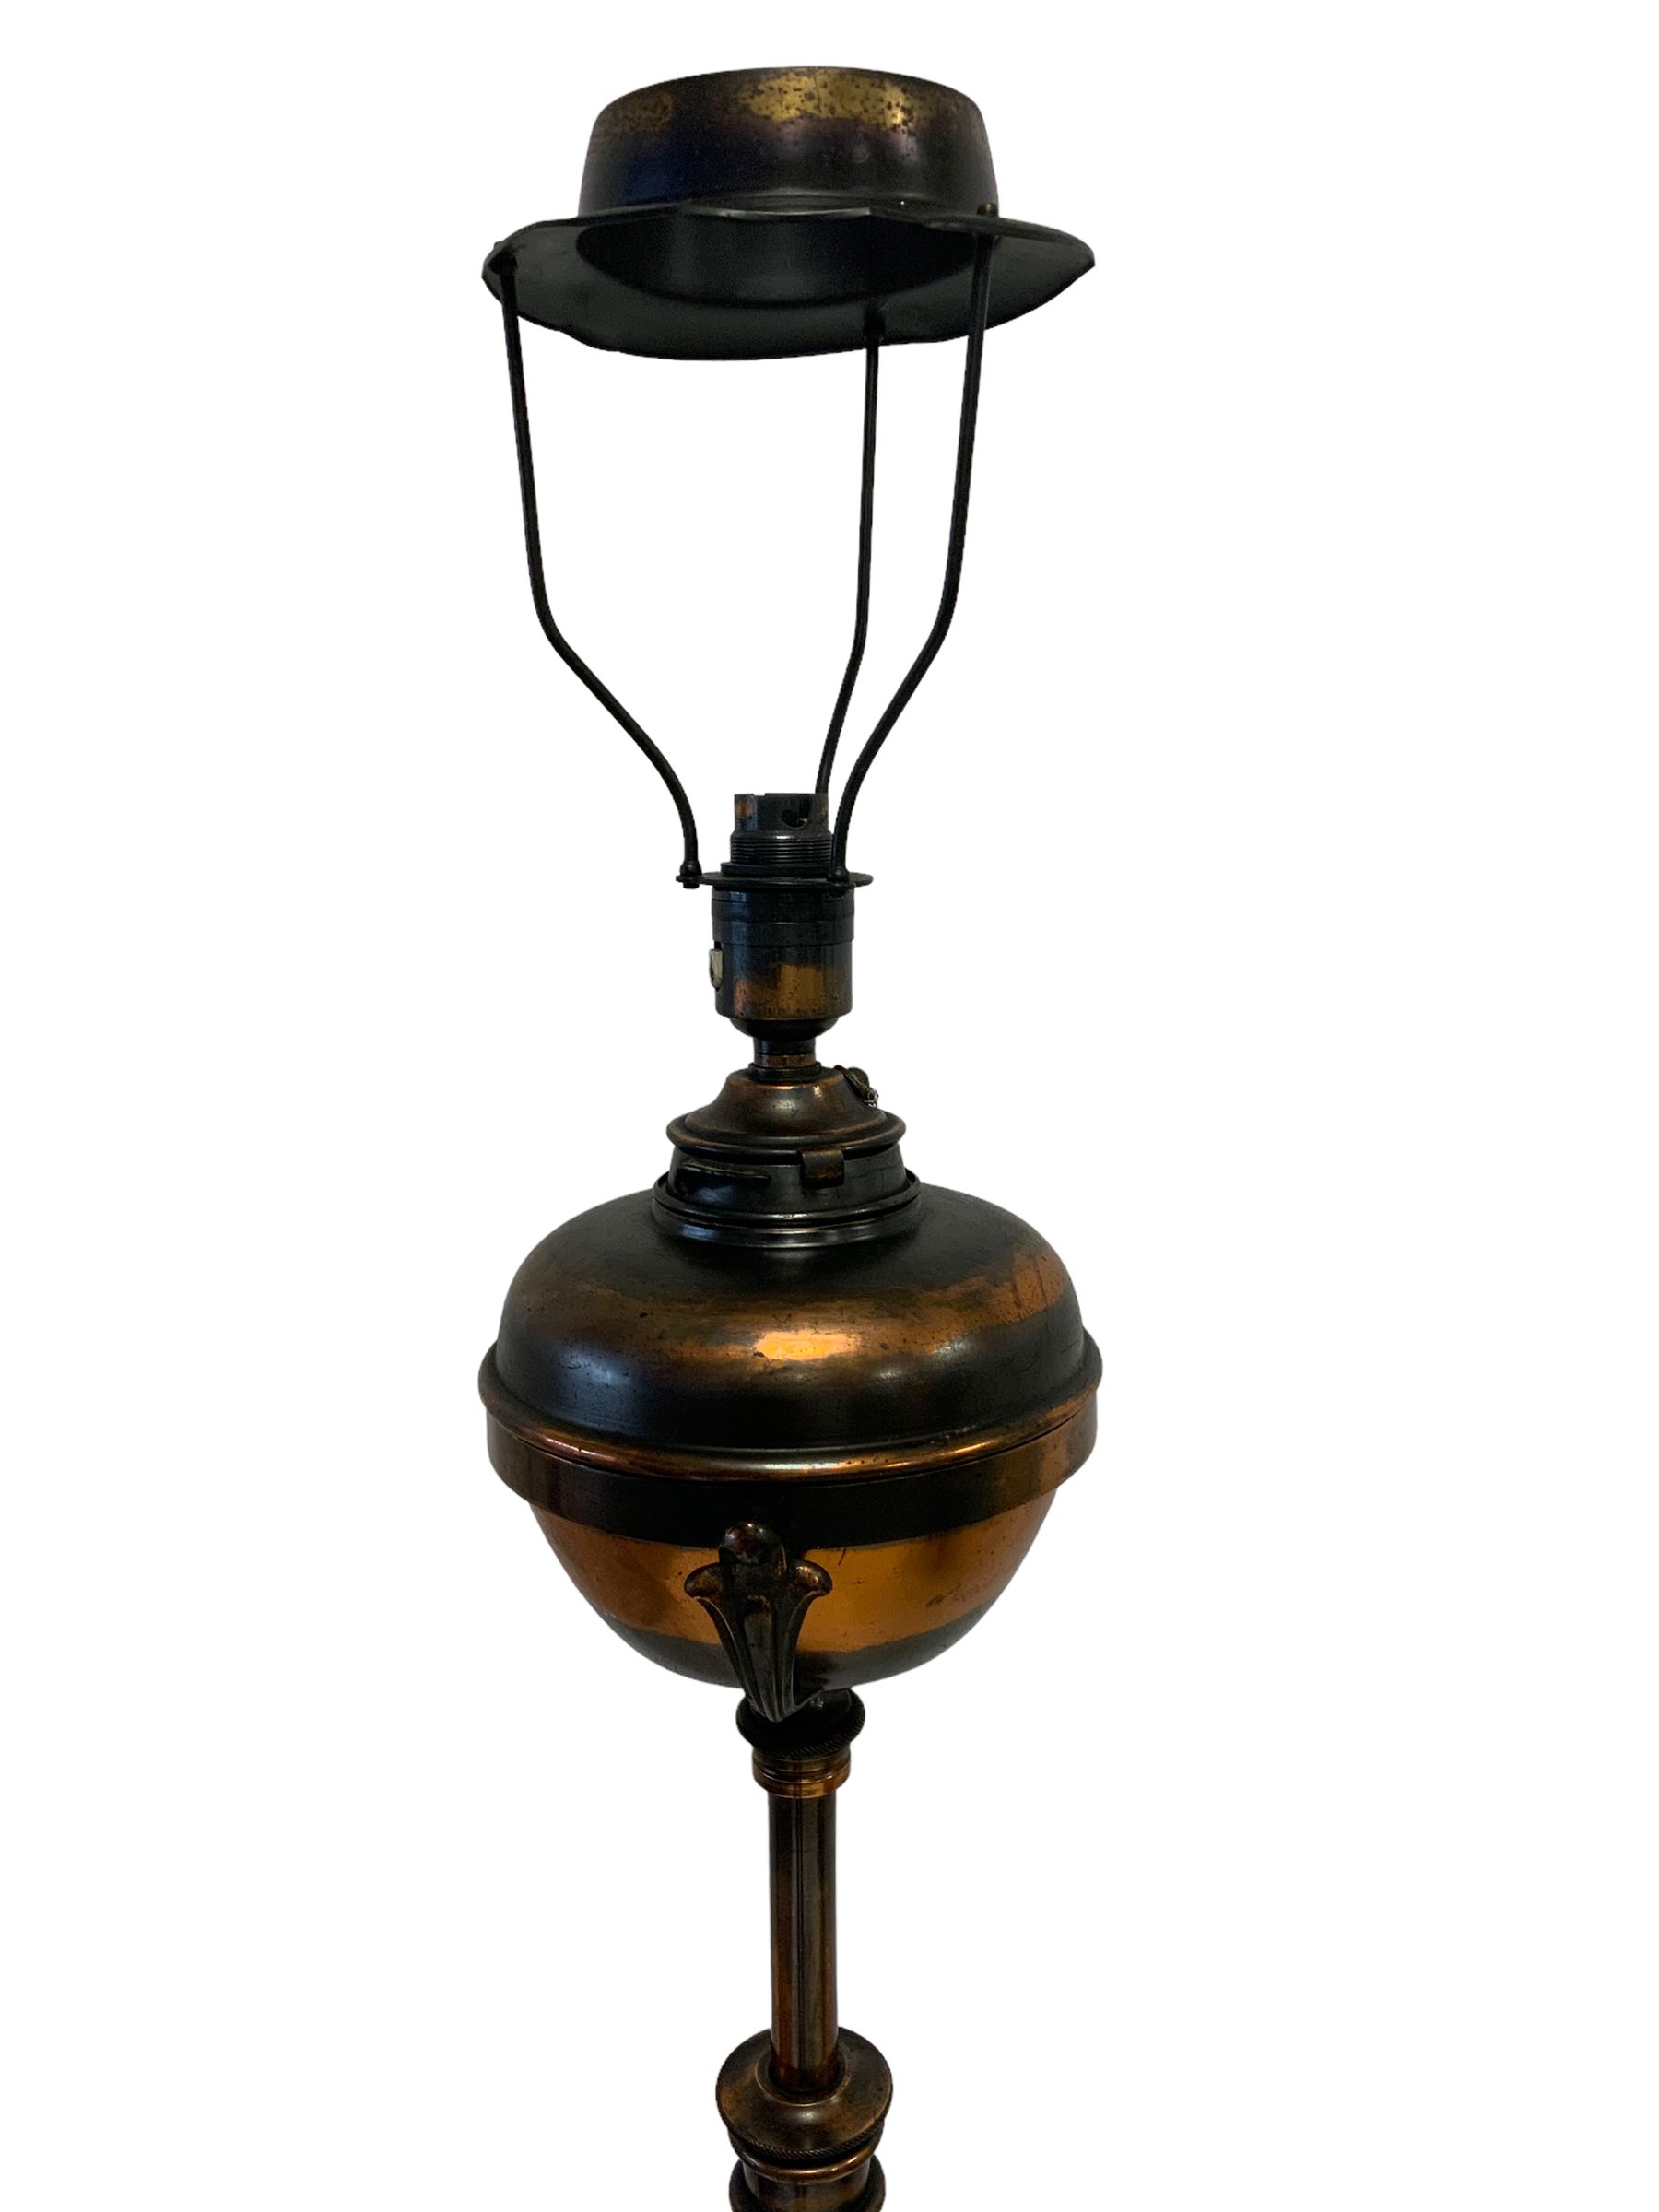 Early 20th century bronzed brass telescopic standard lamp - Image 3 of 4